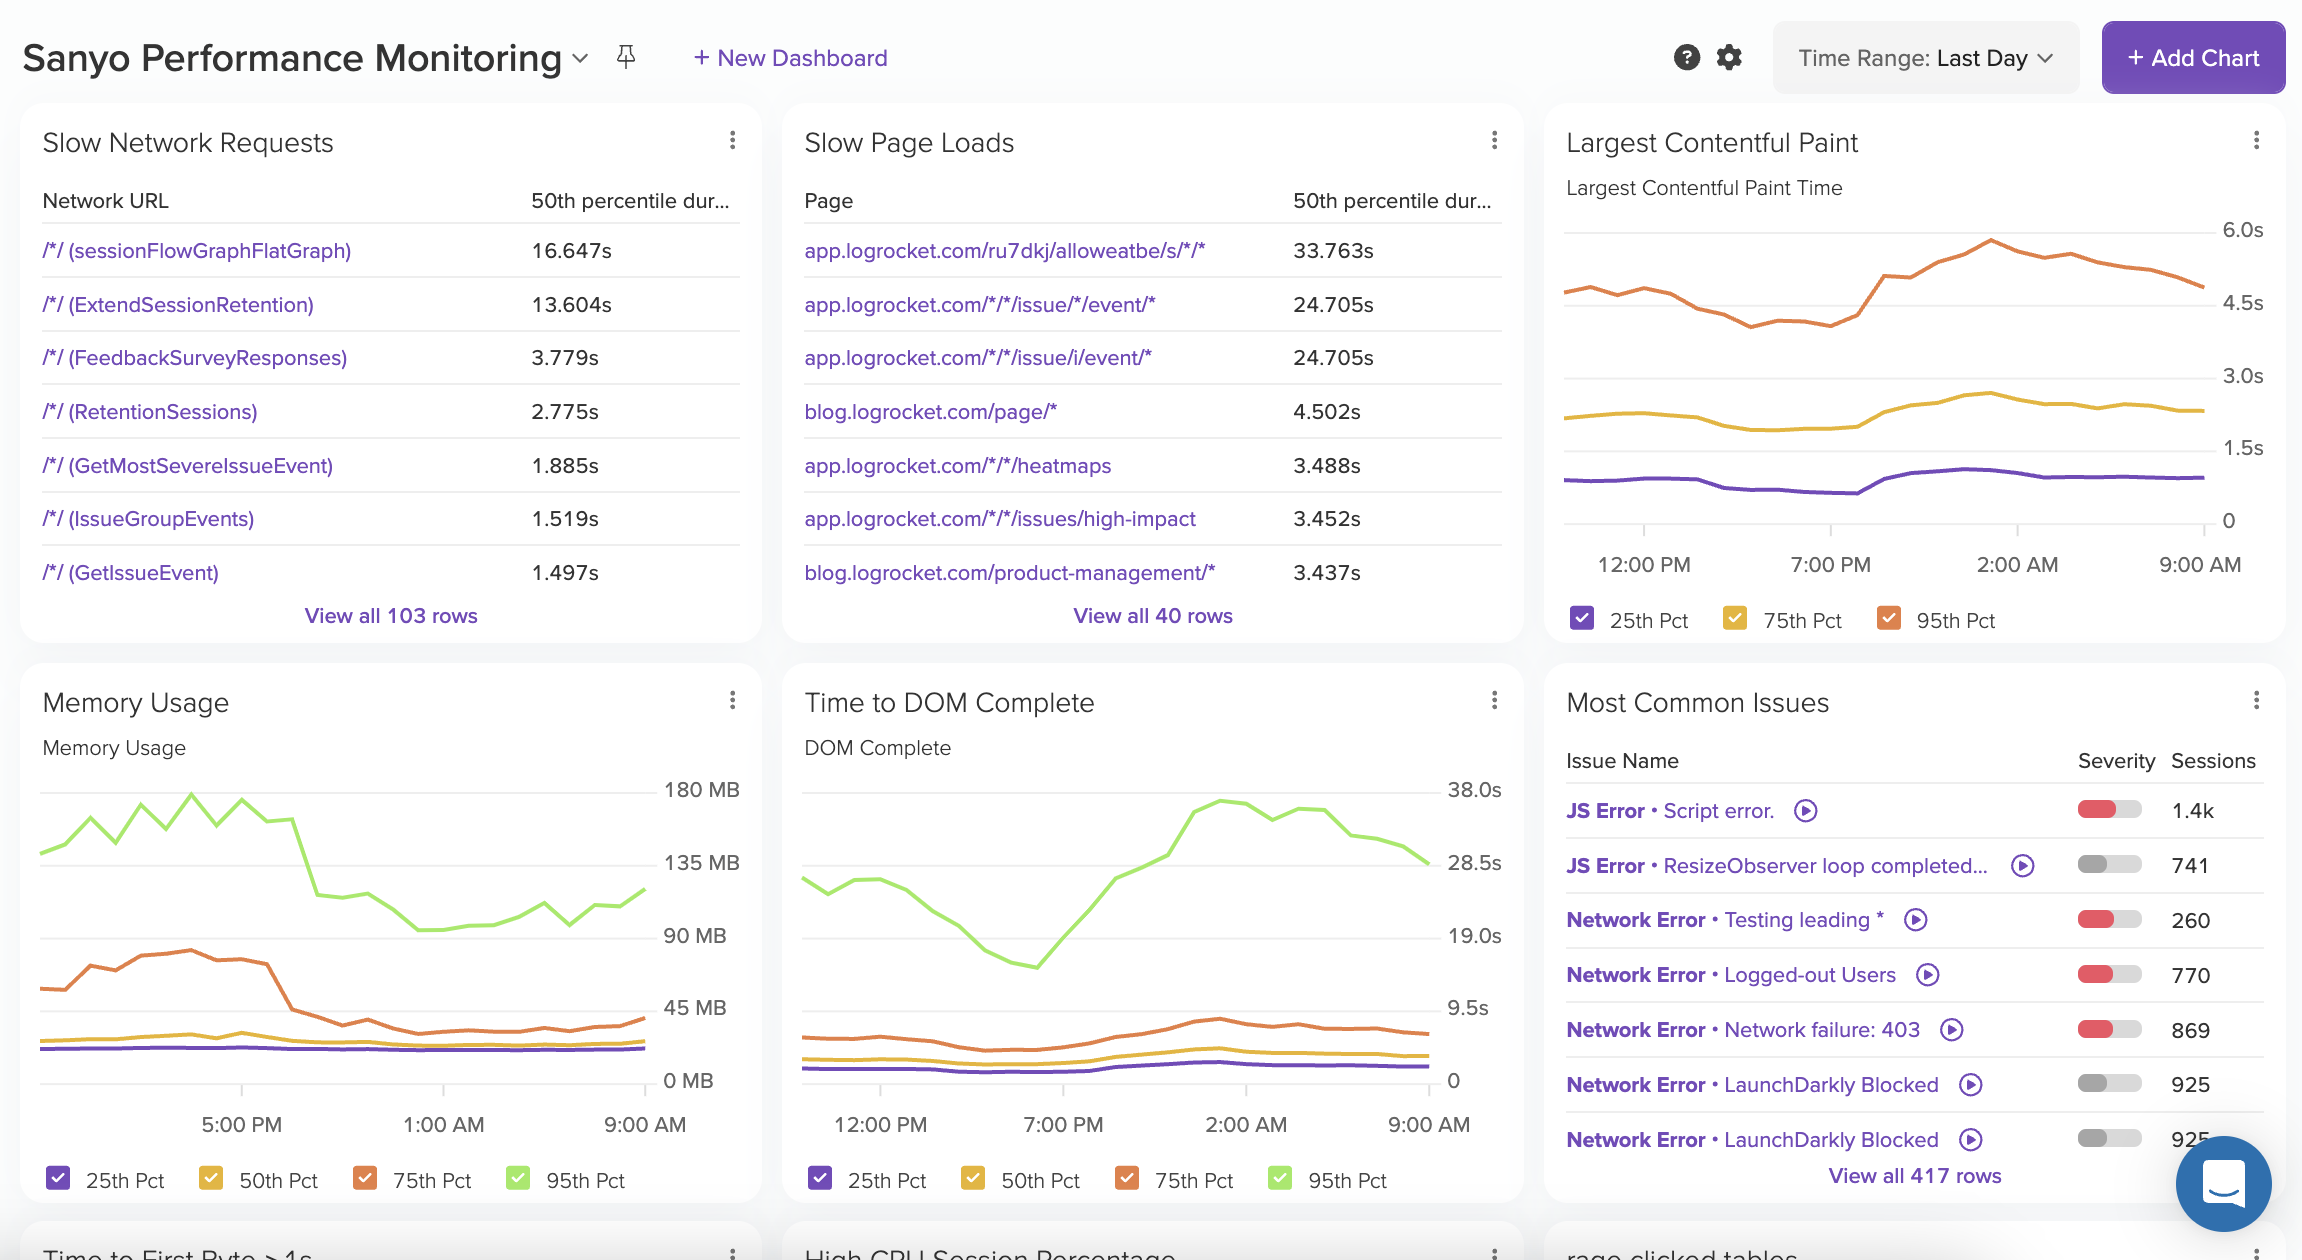 Dashboards allow you to track trends in aggregate performance